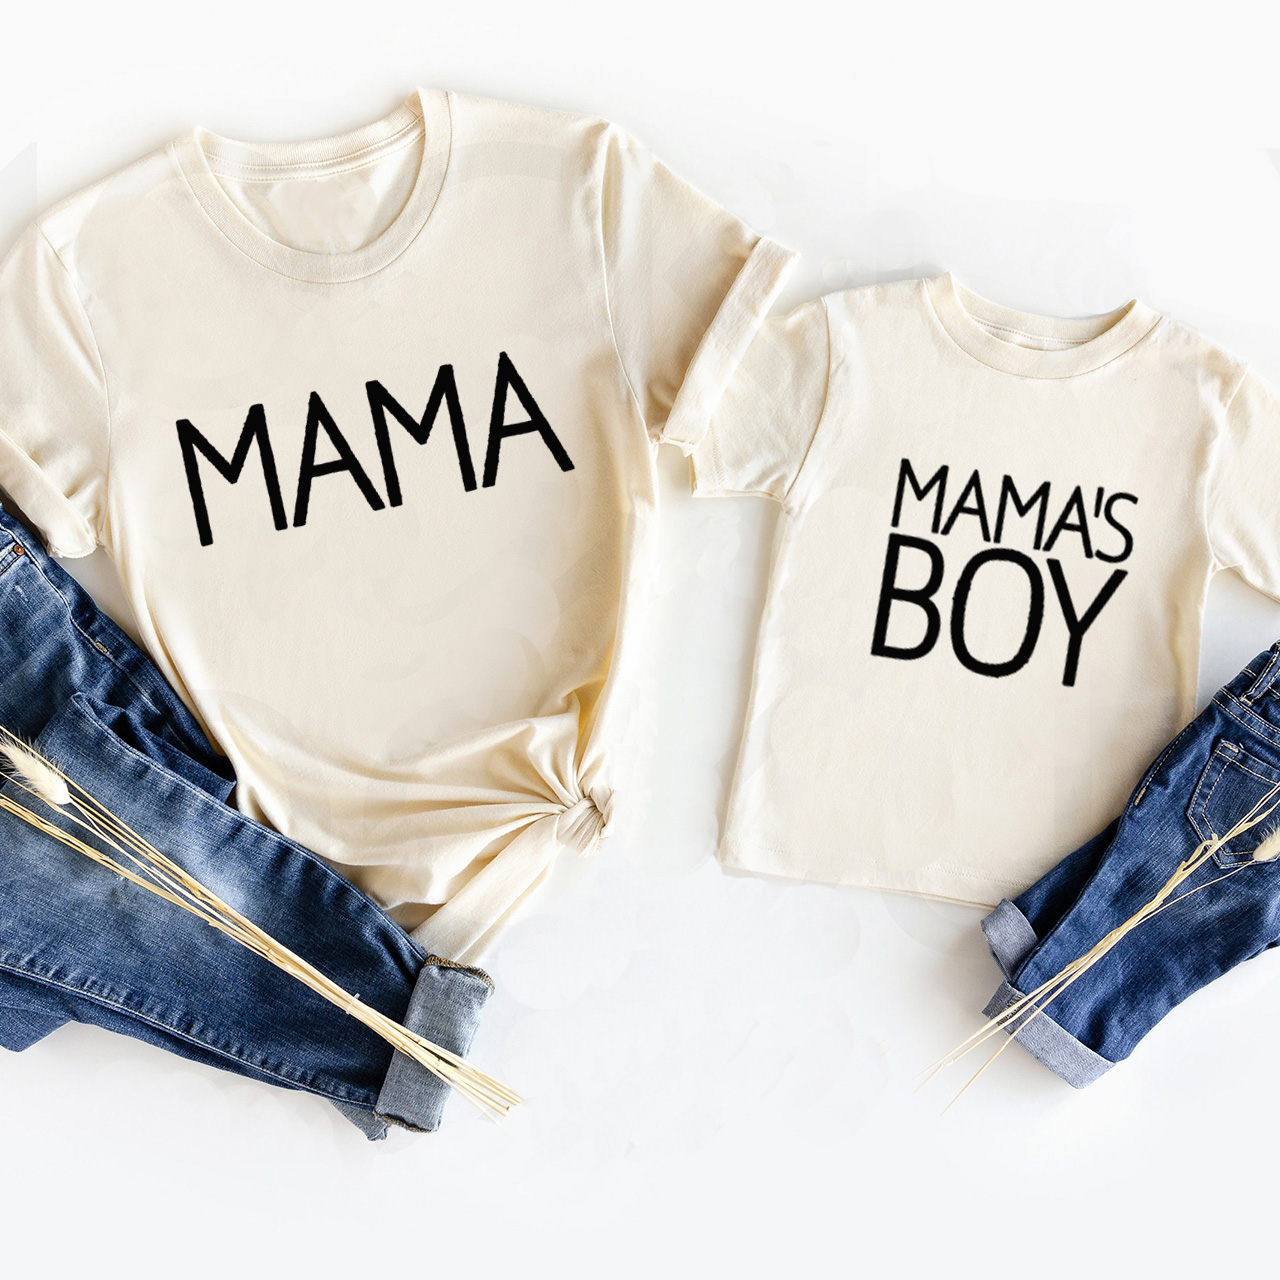 Mama or Mama's Boy & Girl Mother's Day Gift Matching T-Shirt